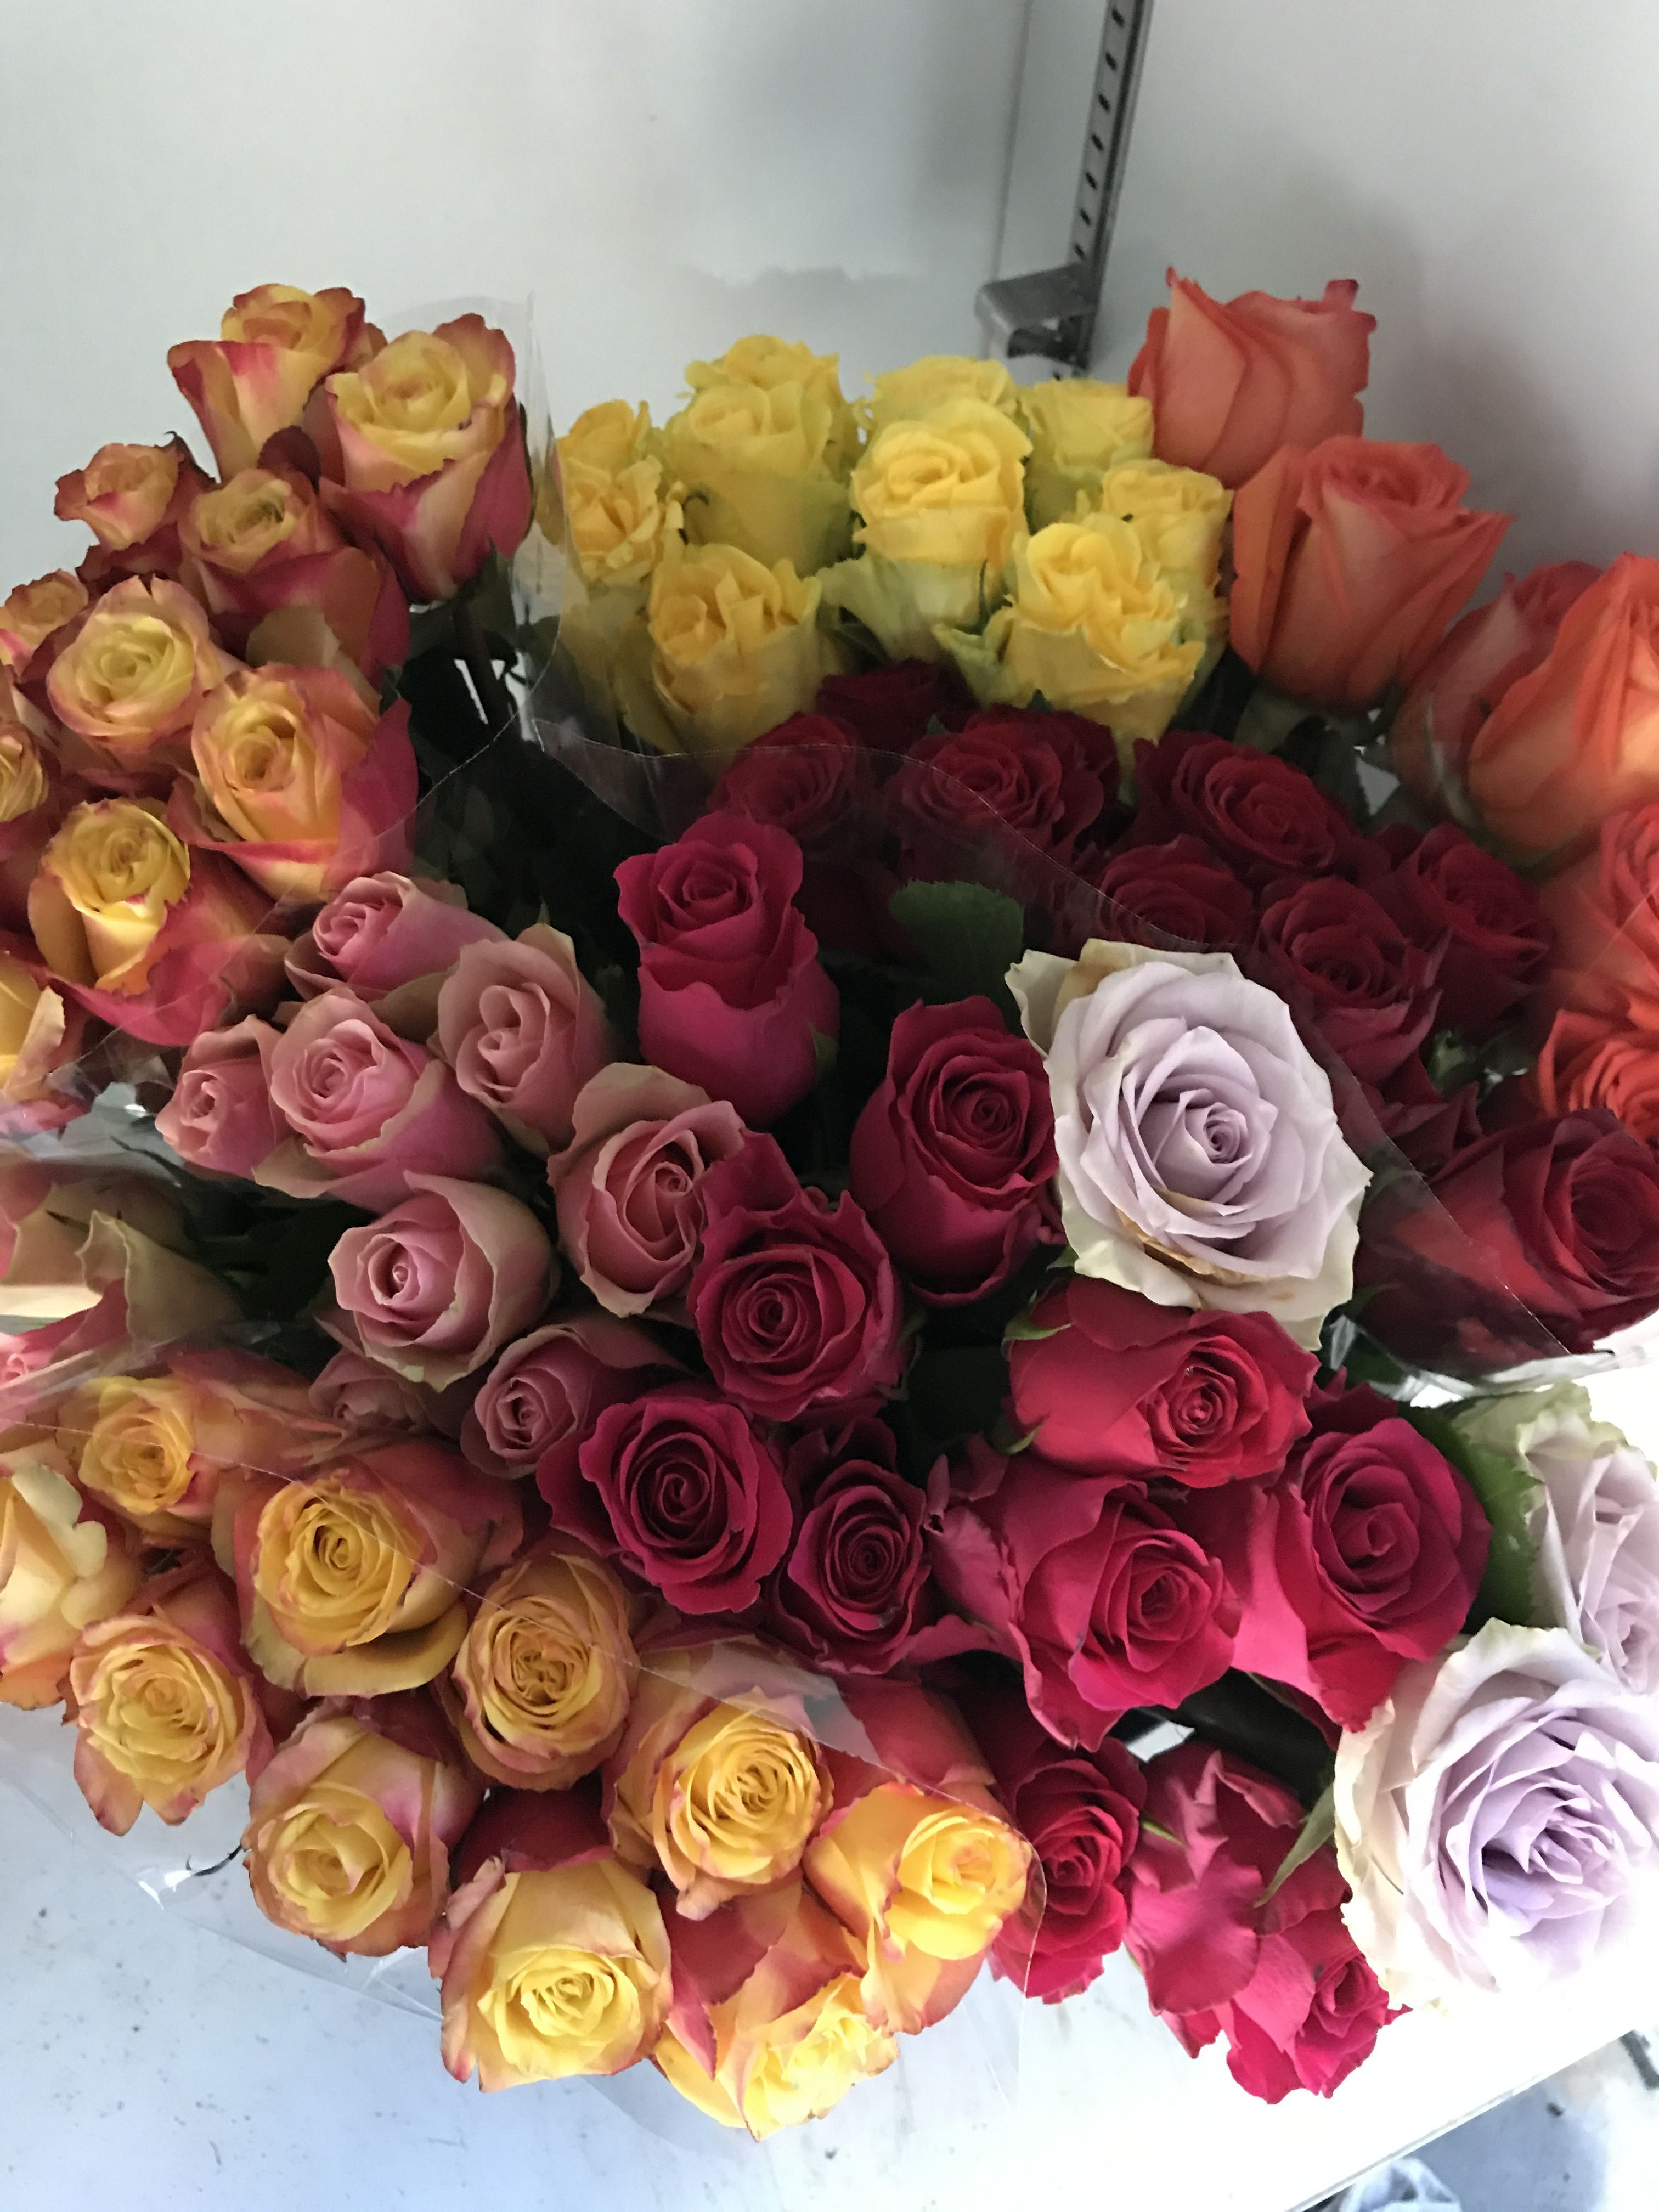 30 attractive wholesale Flowers and Vases 2024 free download wholesale flowers and vases of blooms only have a huge selection of the cheap wholesale flowers inside blooms only have a huge selection of the cheap wholesale flowers but these are not